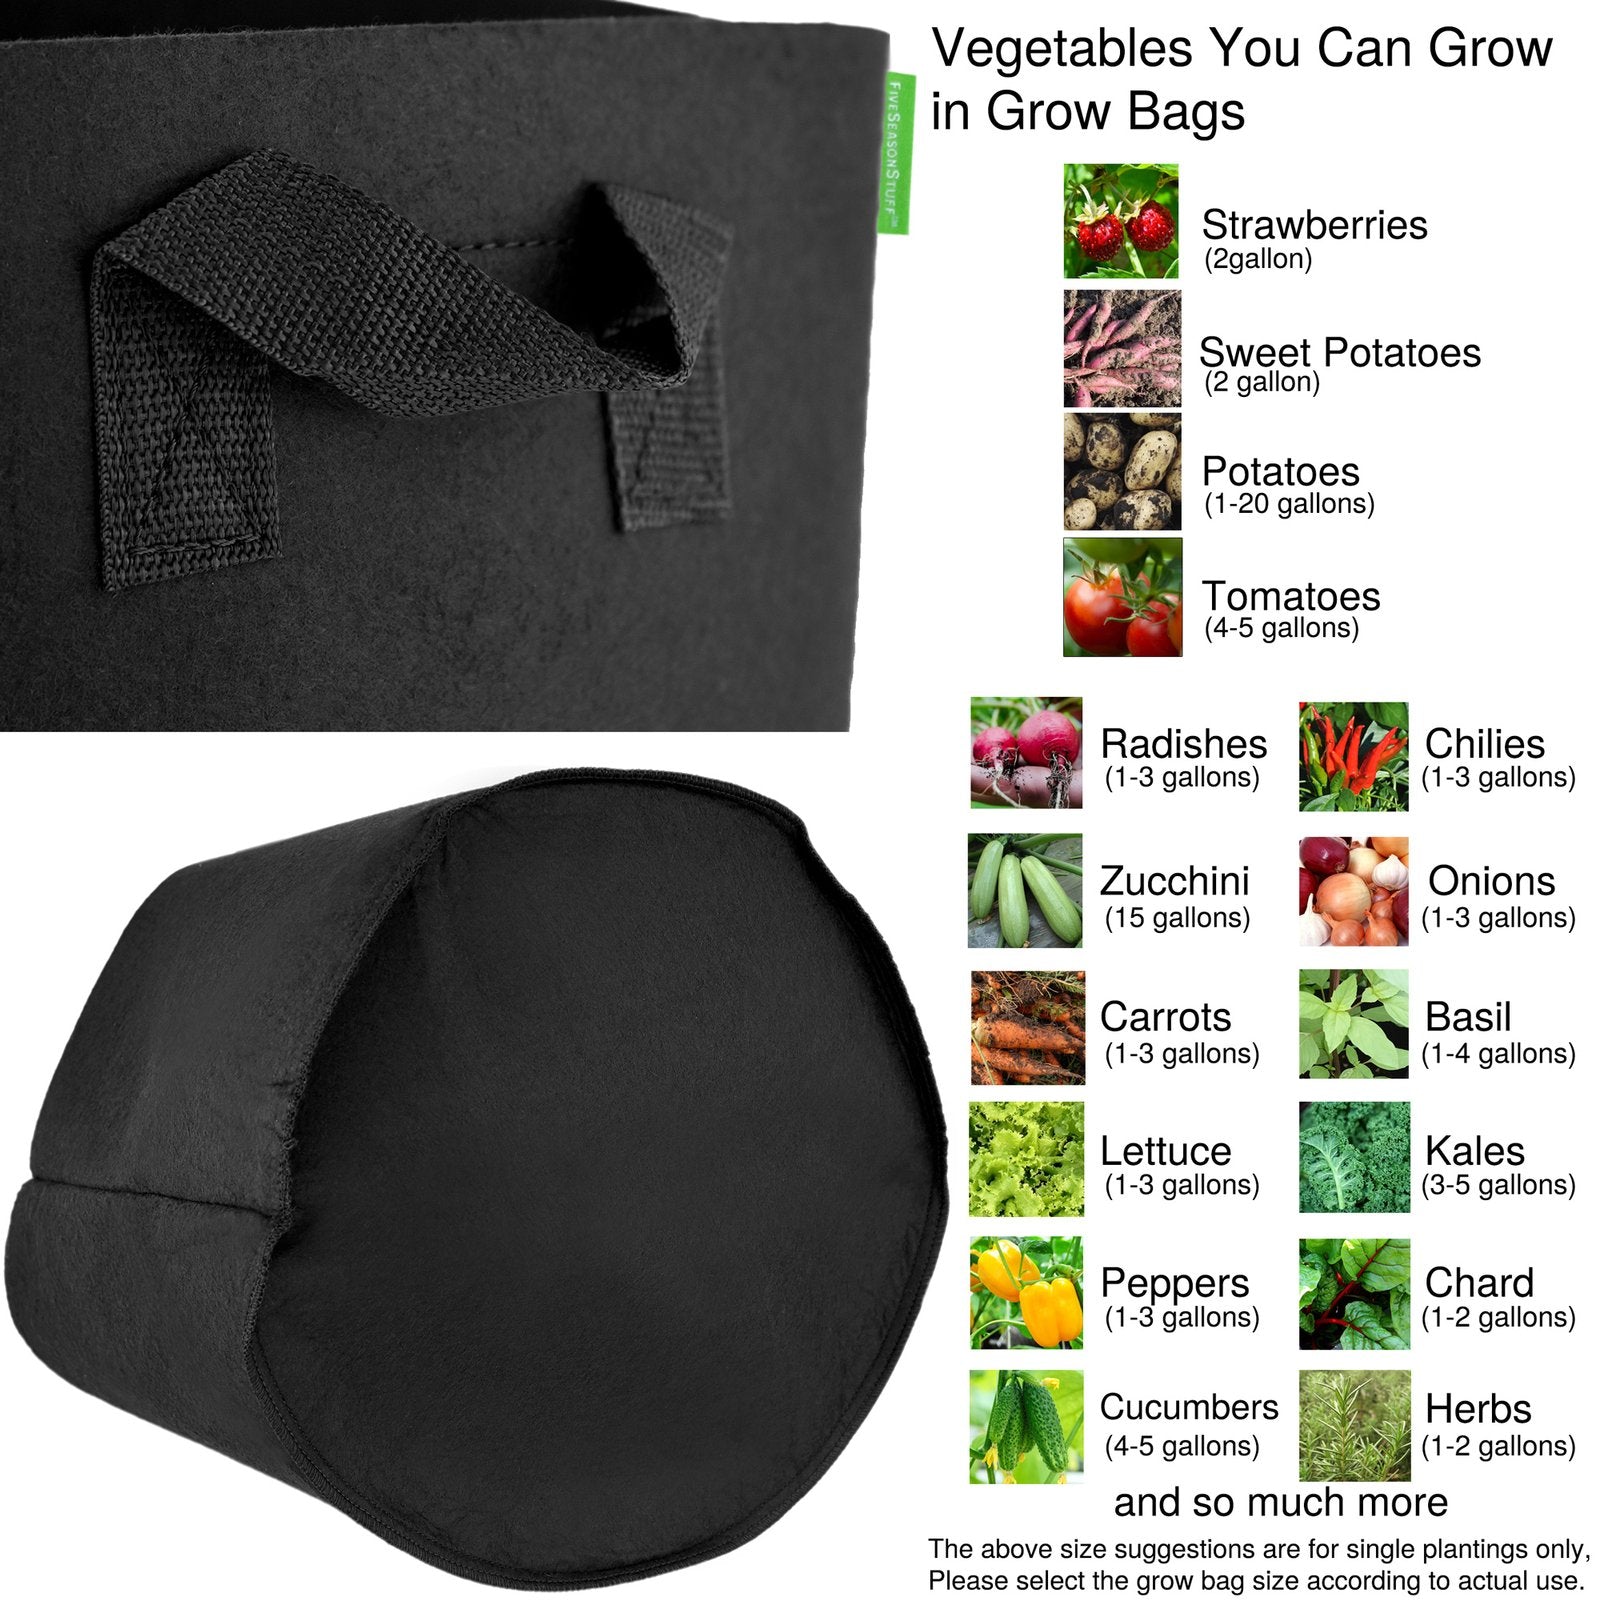 10 Pack 3 Gallons Grow Bags - Breathable Fabric Pots for Healthier Plants Vegetables Flowers – Heavy Duty Thick Containers with Sturdy Handles - Aeration Planters for Smart Gardening (Black)